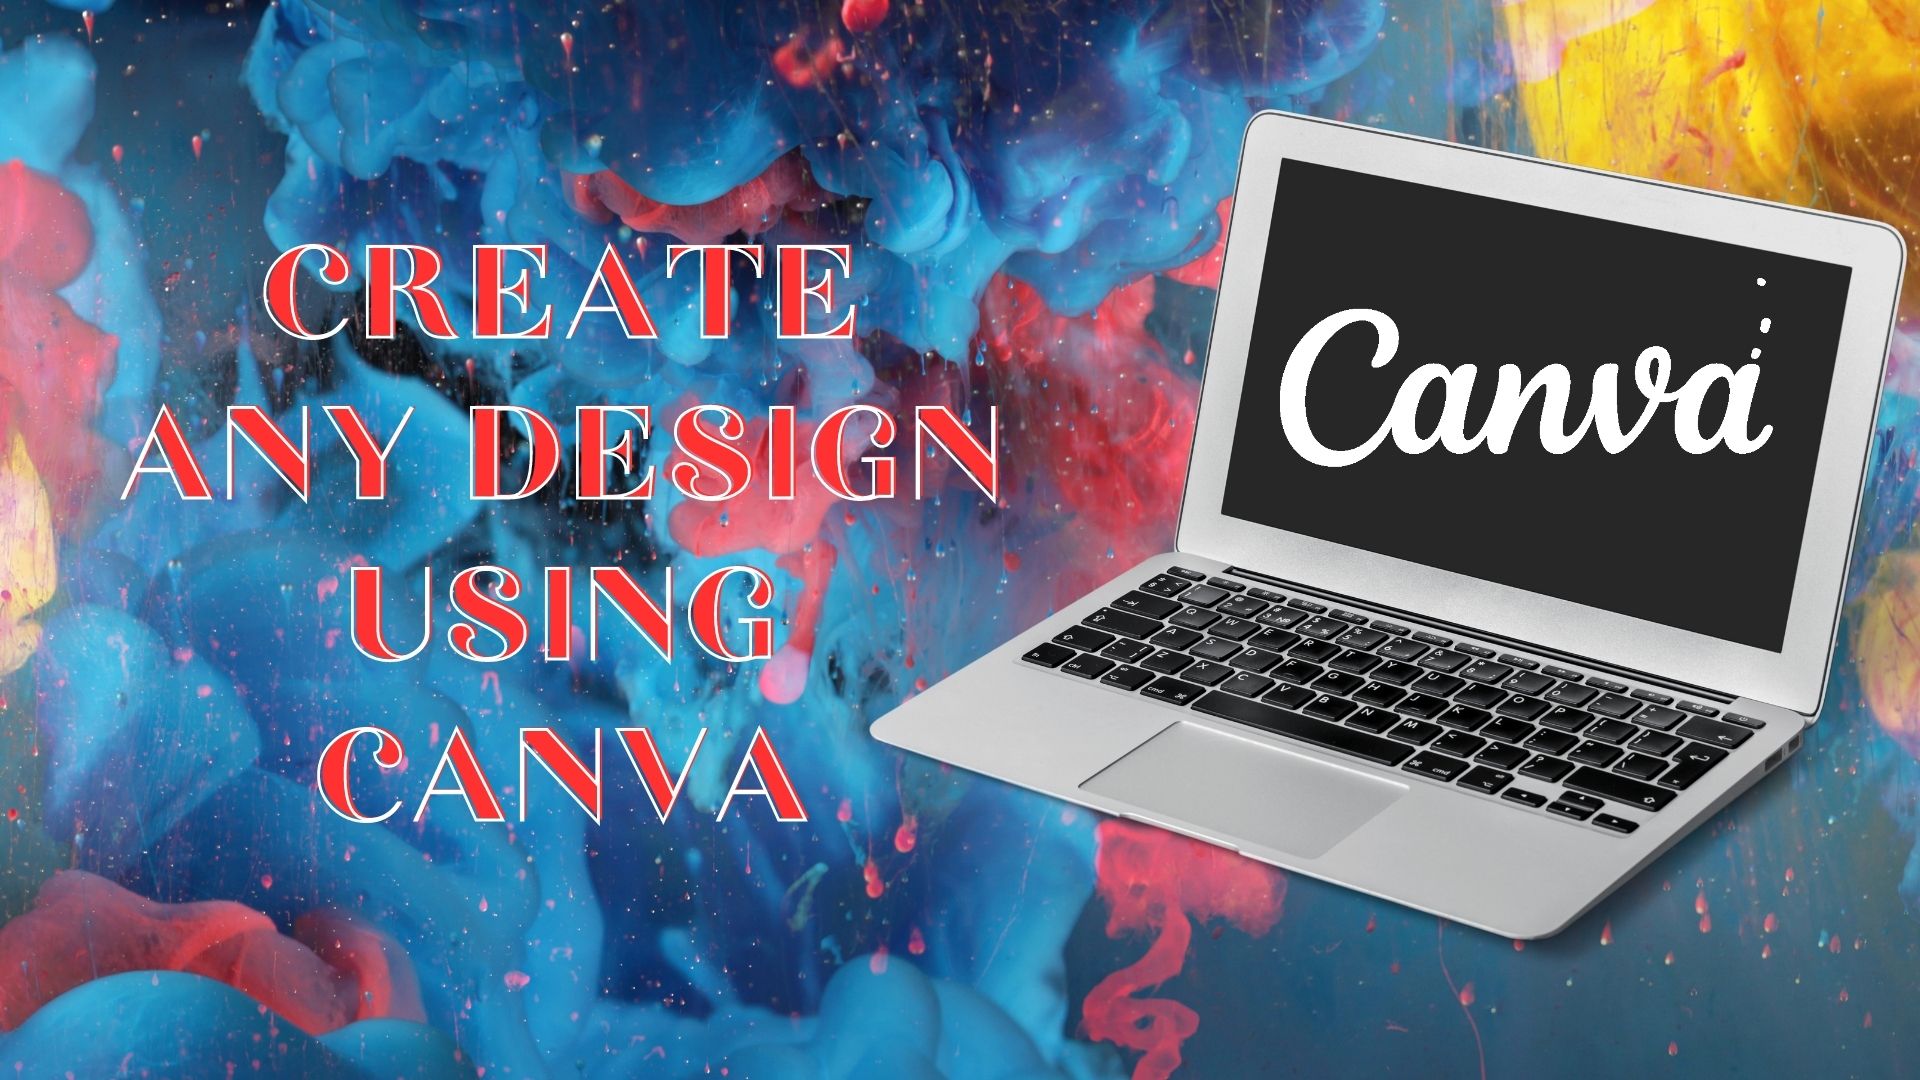 180158I will create anything on canva